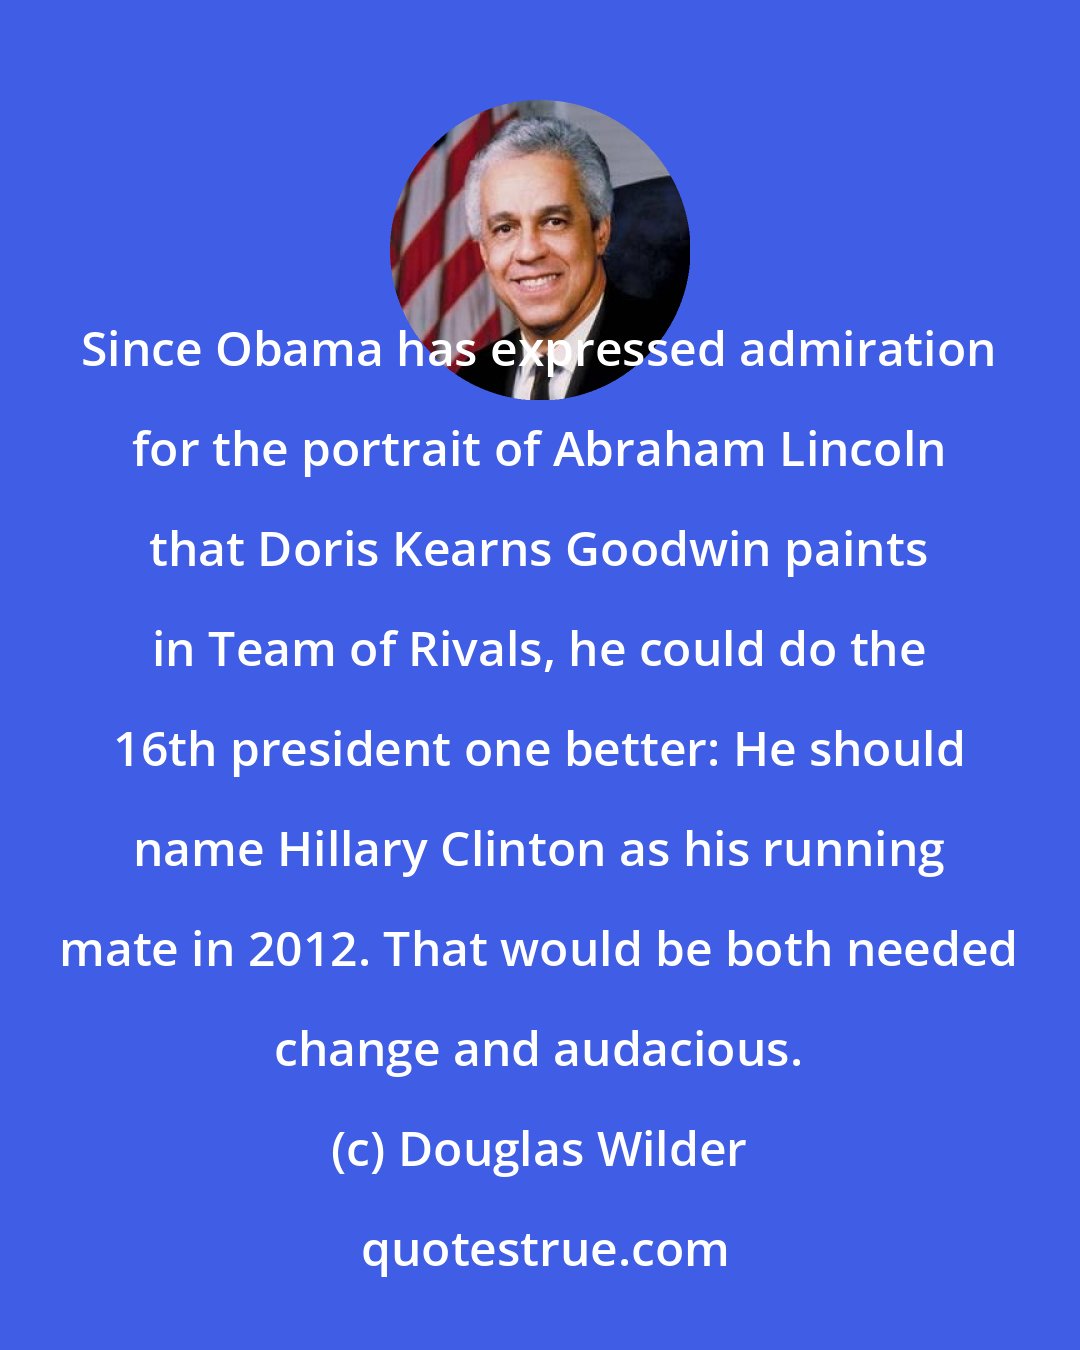 Douglas Wilder: Since Obama has expressed admiration for the portrait of Abraham Lincoln that Doris Kearns Goodwin paints in Team of Rivals, he could do the 16th president one better: He should name Hillary Clinton as his running mate in 2012. That would be both needed change and audacious.